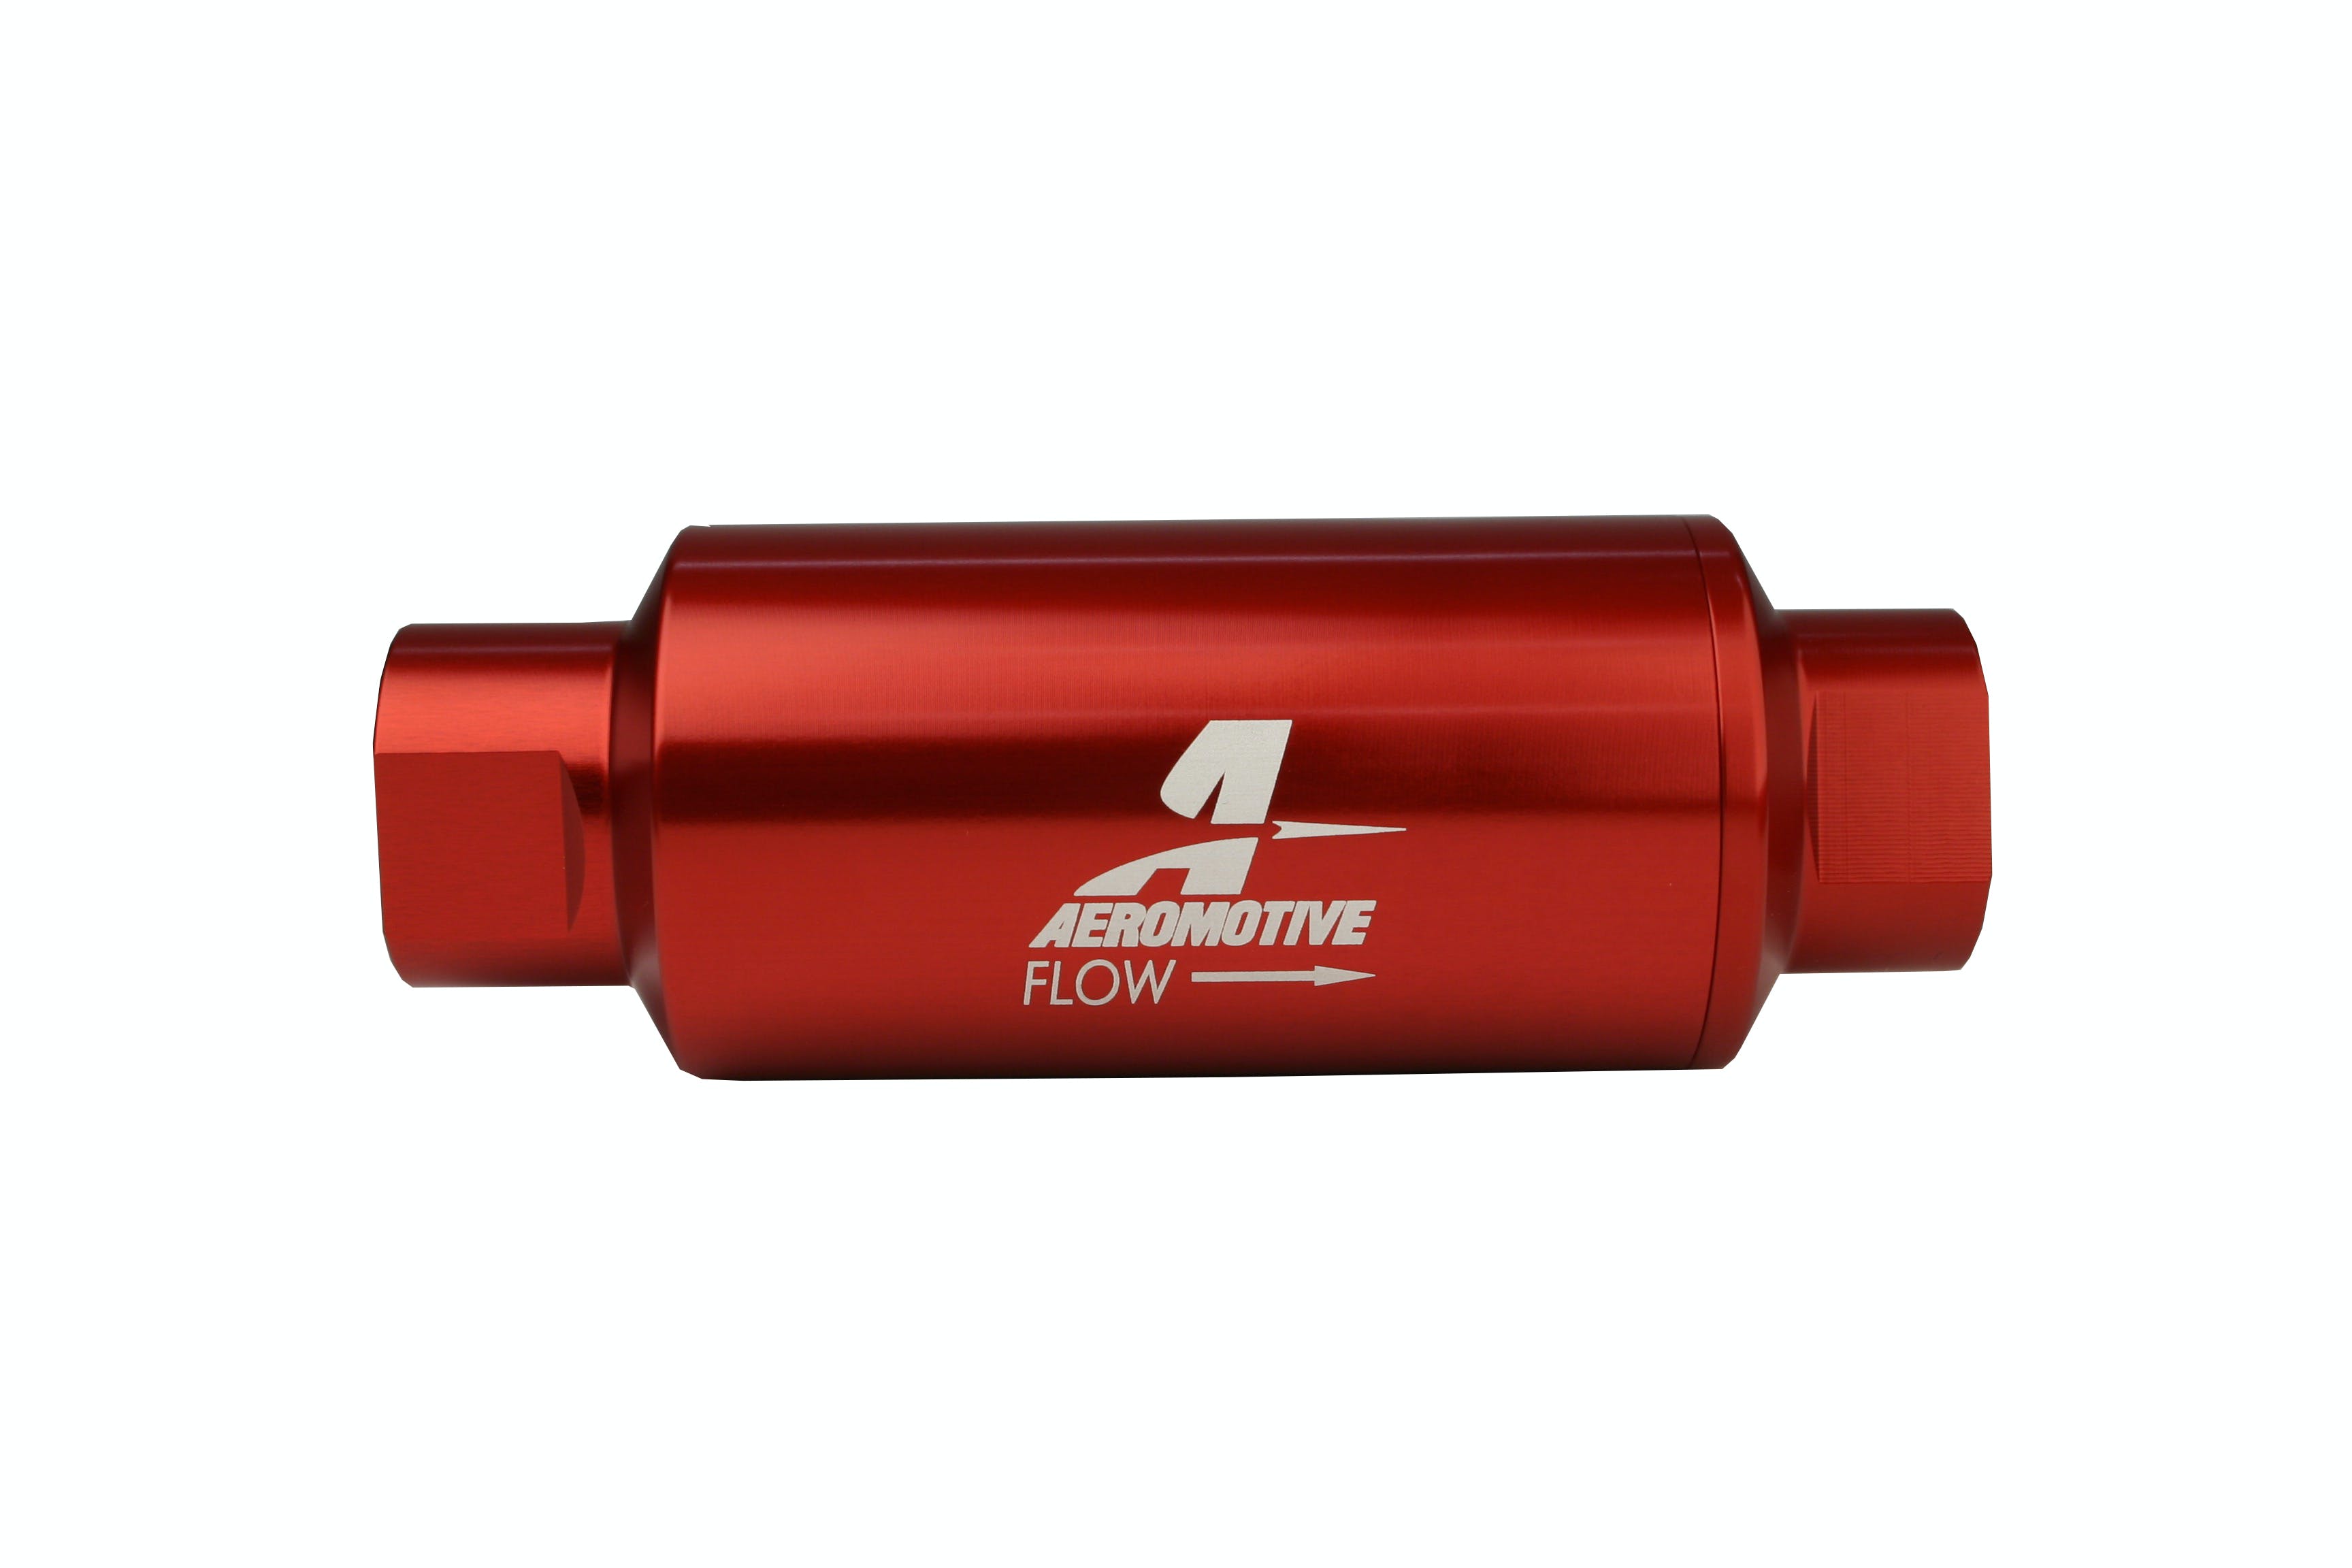 Aeromotive Fuel System 12335 Filter In-Line AN-10 size, 40 micron stainless steel element, Red Anodize Finish